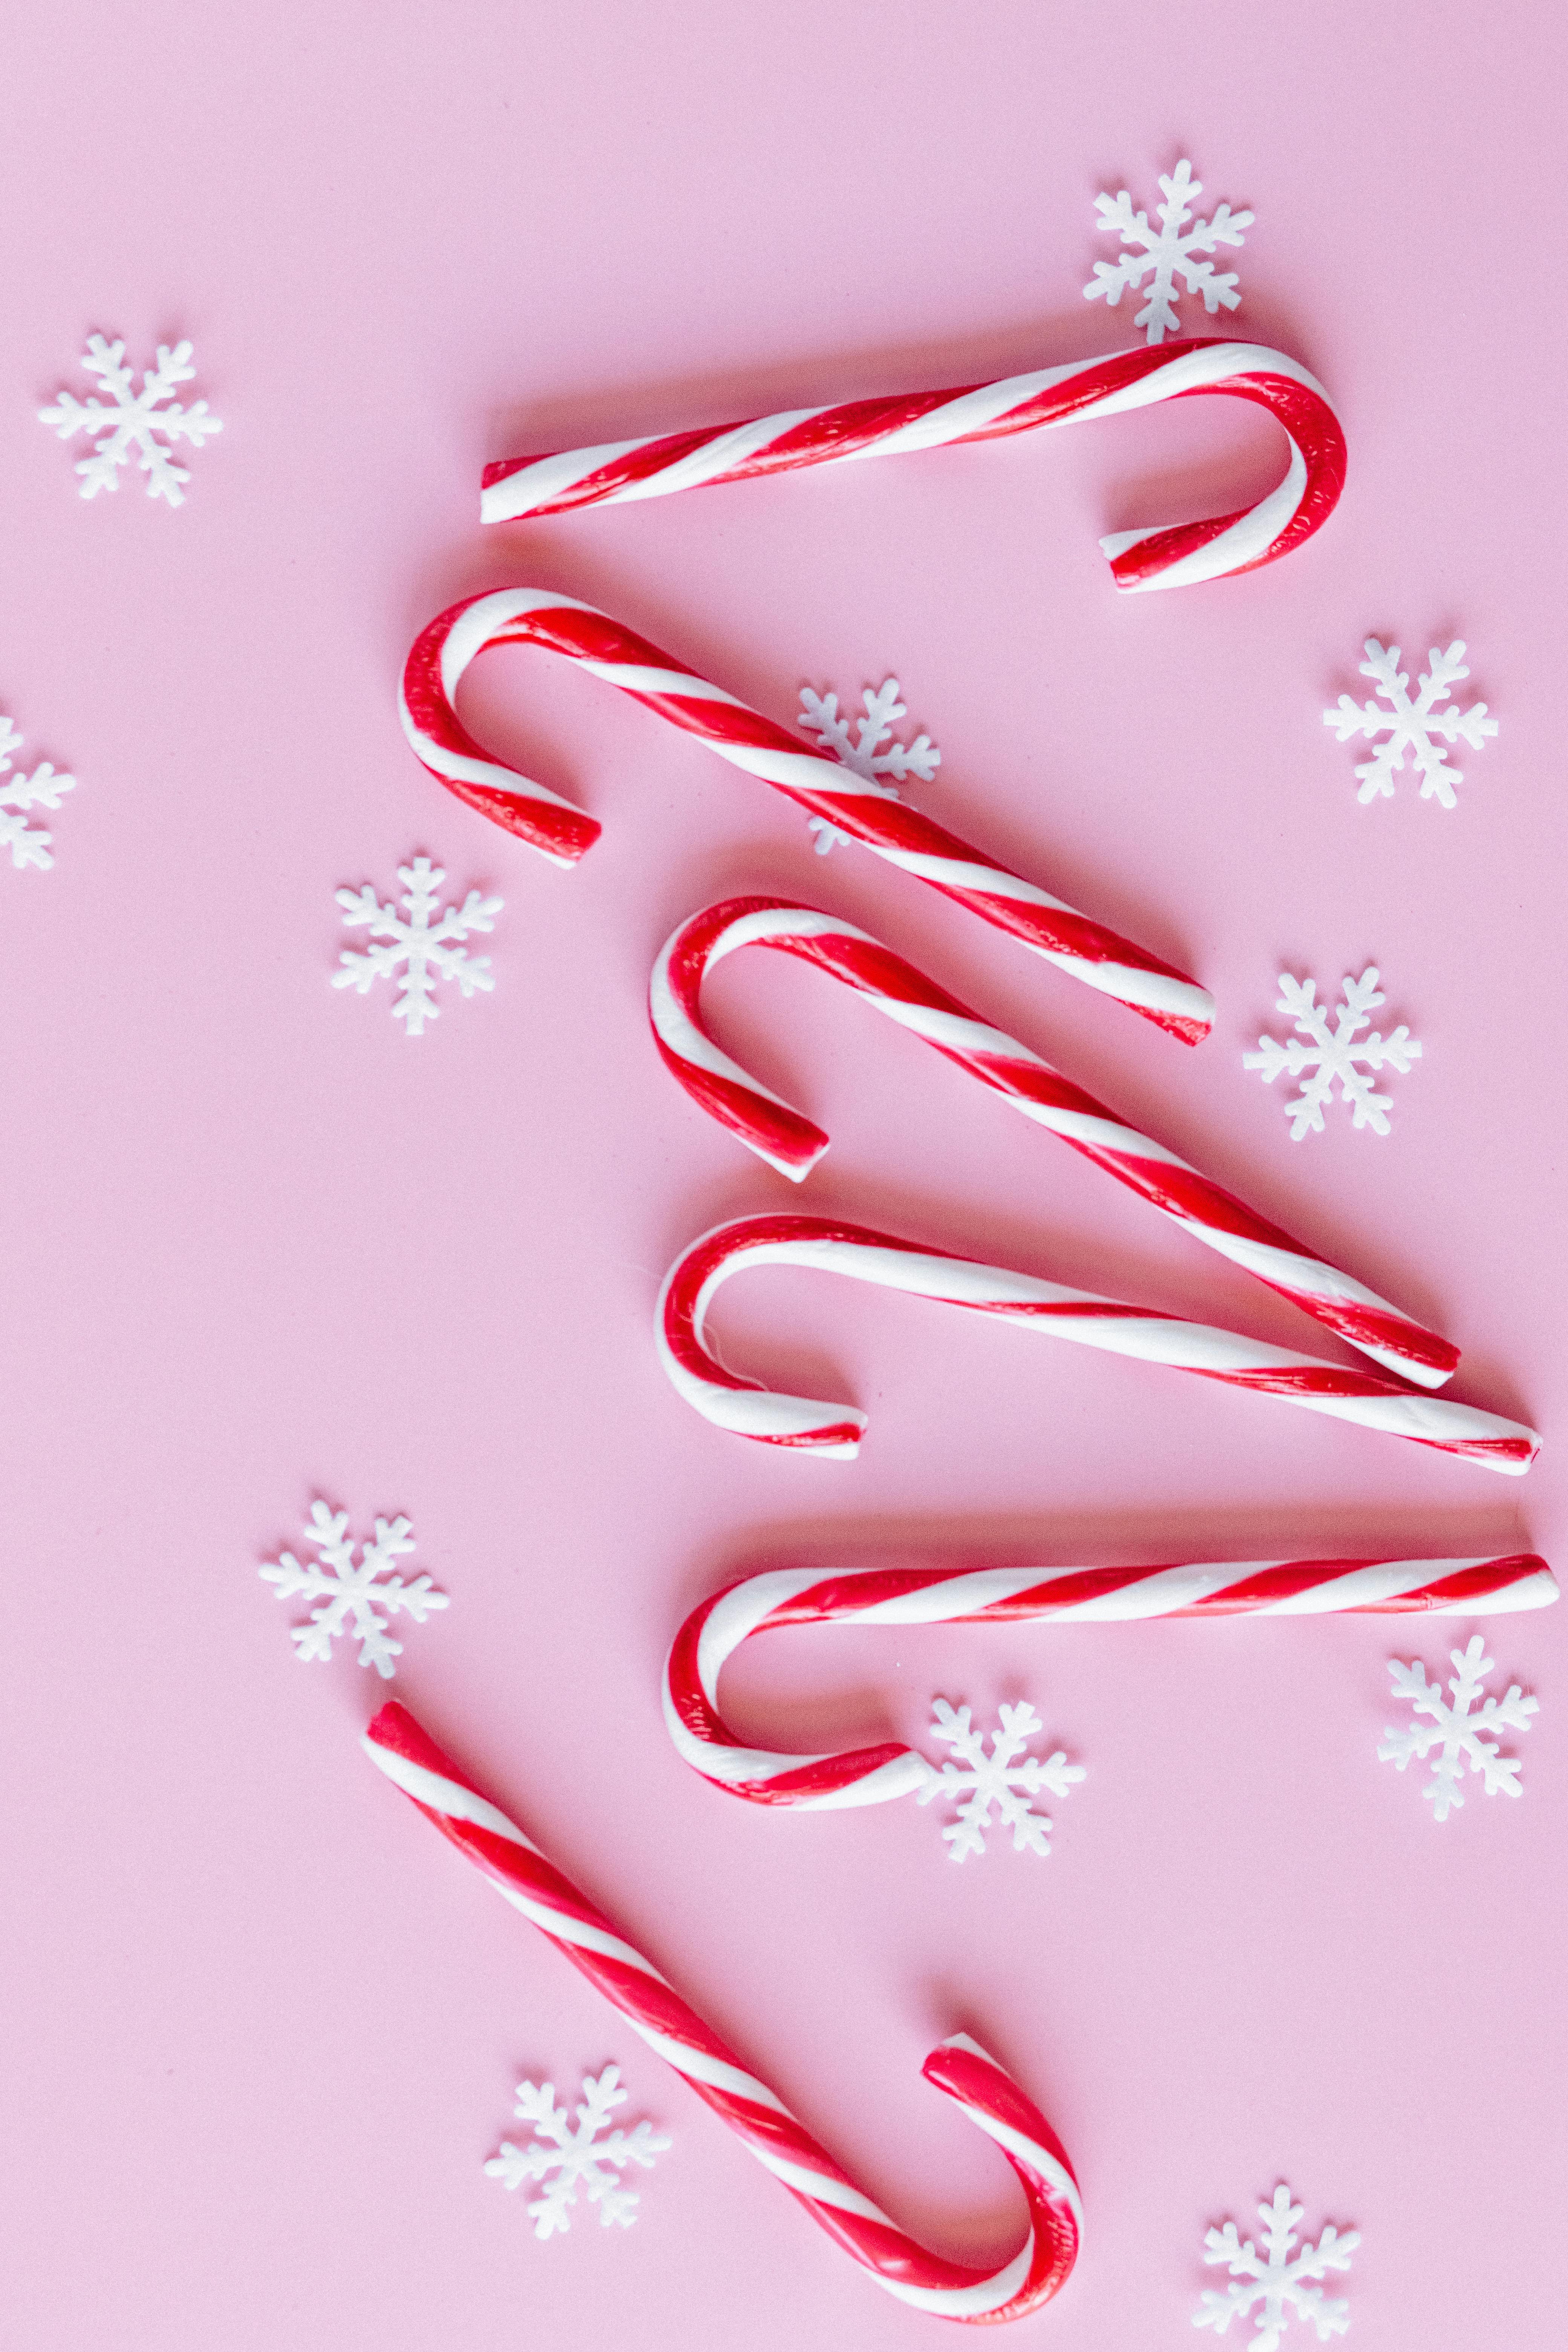 White and Red Candy Canes on Pink Background · Free Stock Photo